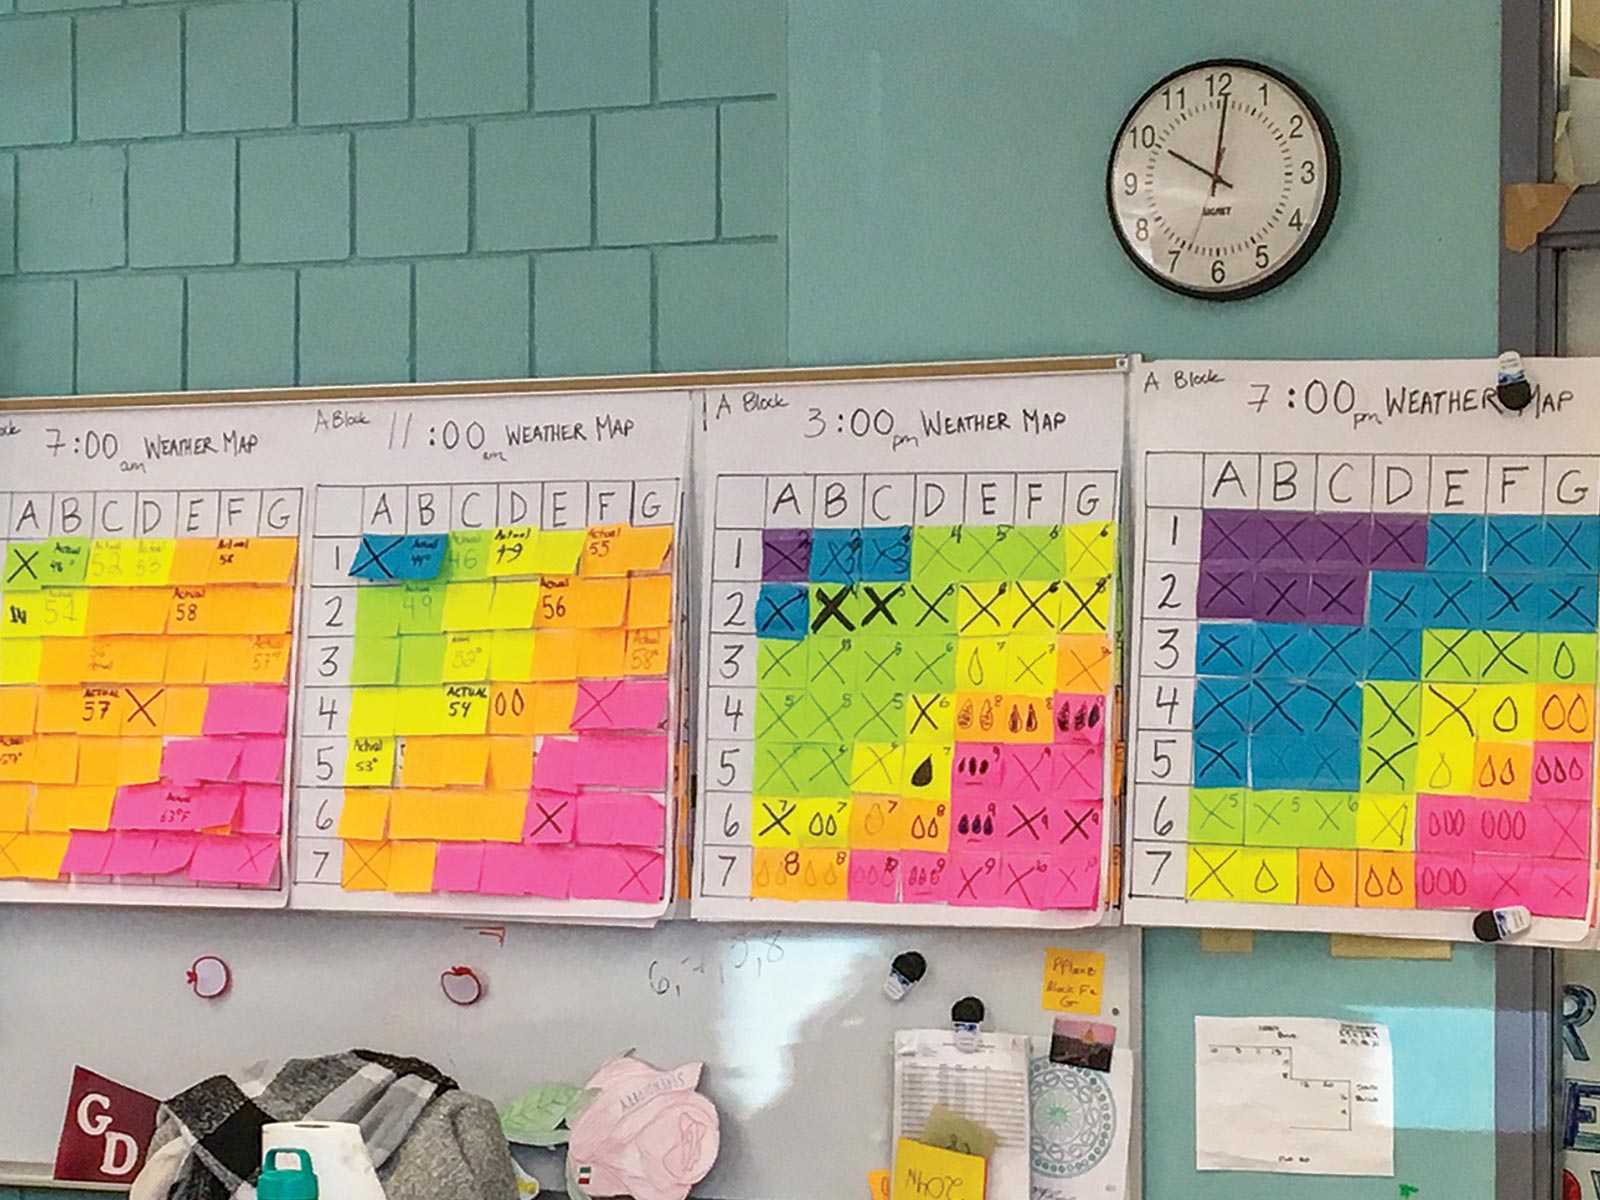 The whole class records data and patterns from different time stamps in the weather stations.